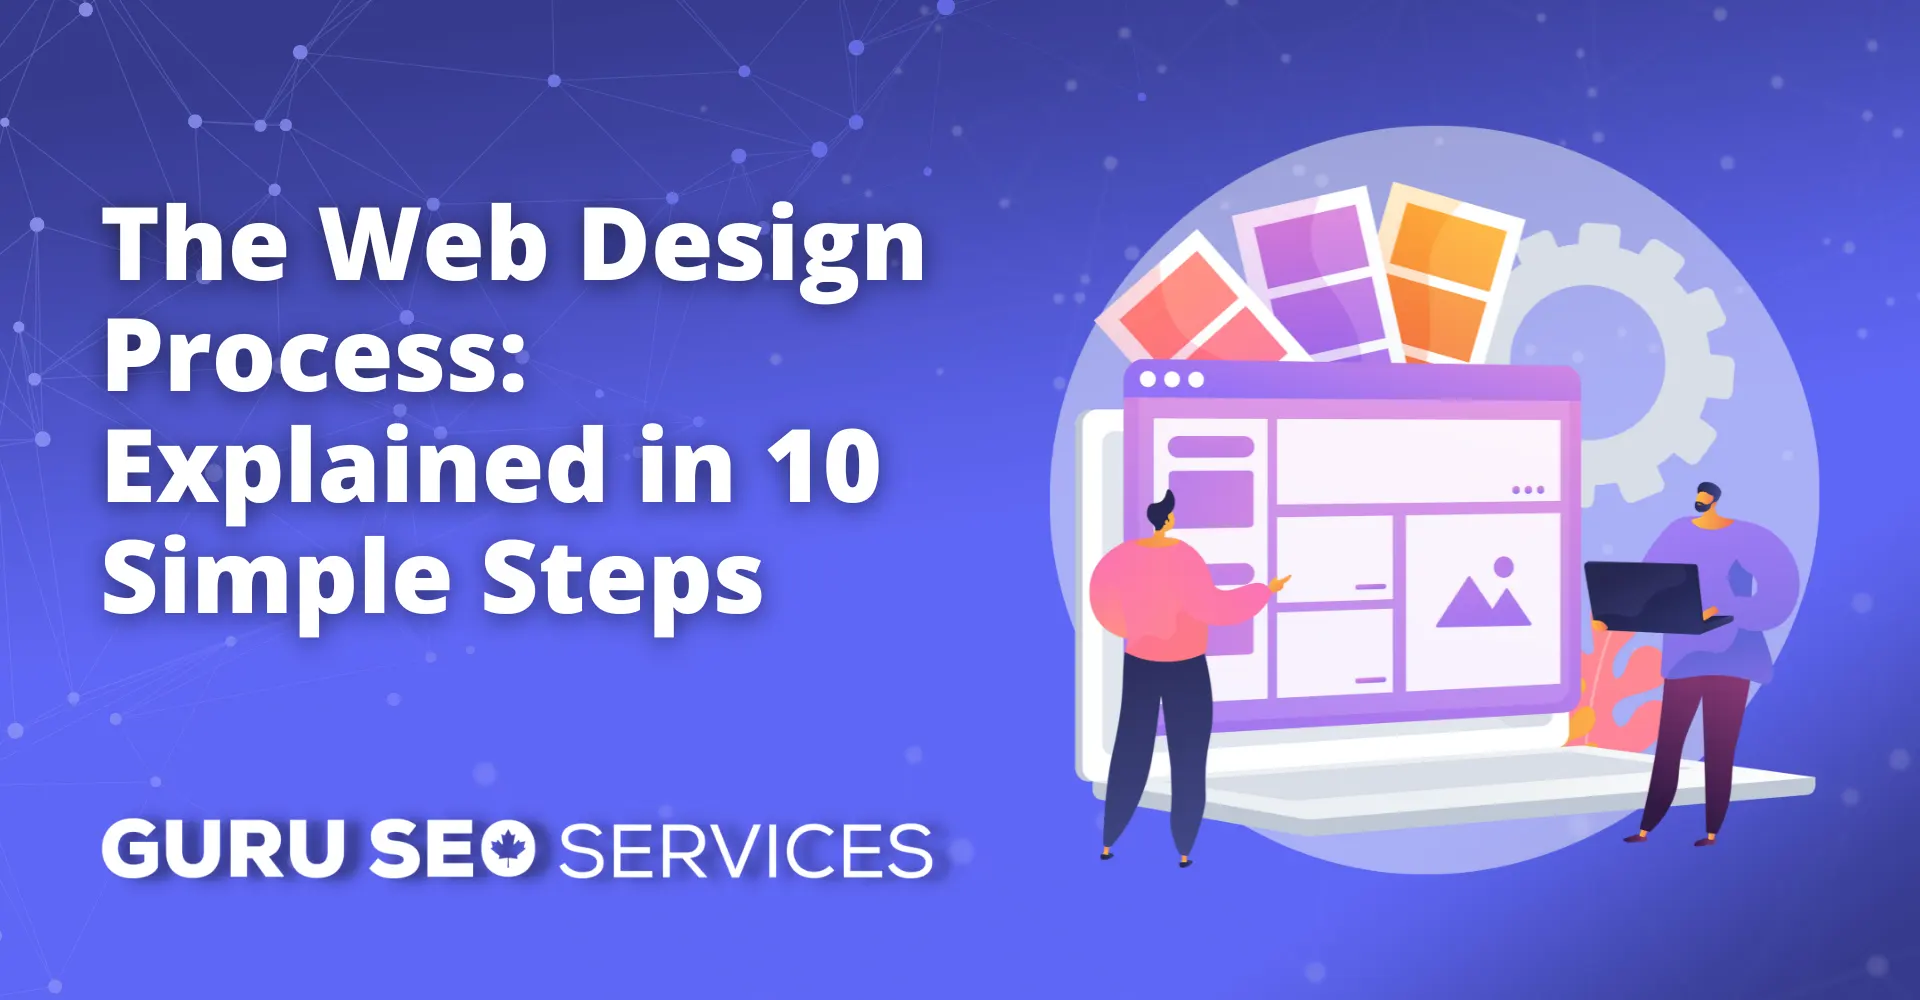 Learn about the web design process in 10 simple steps.